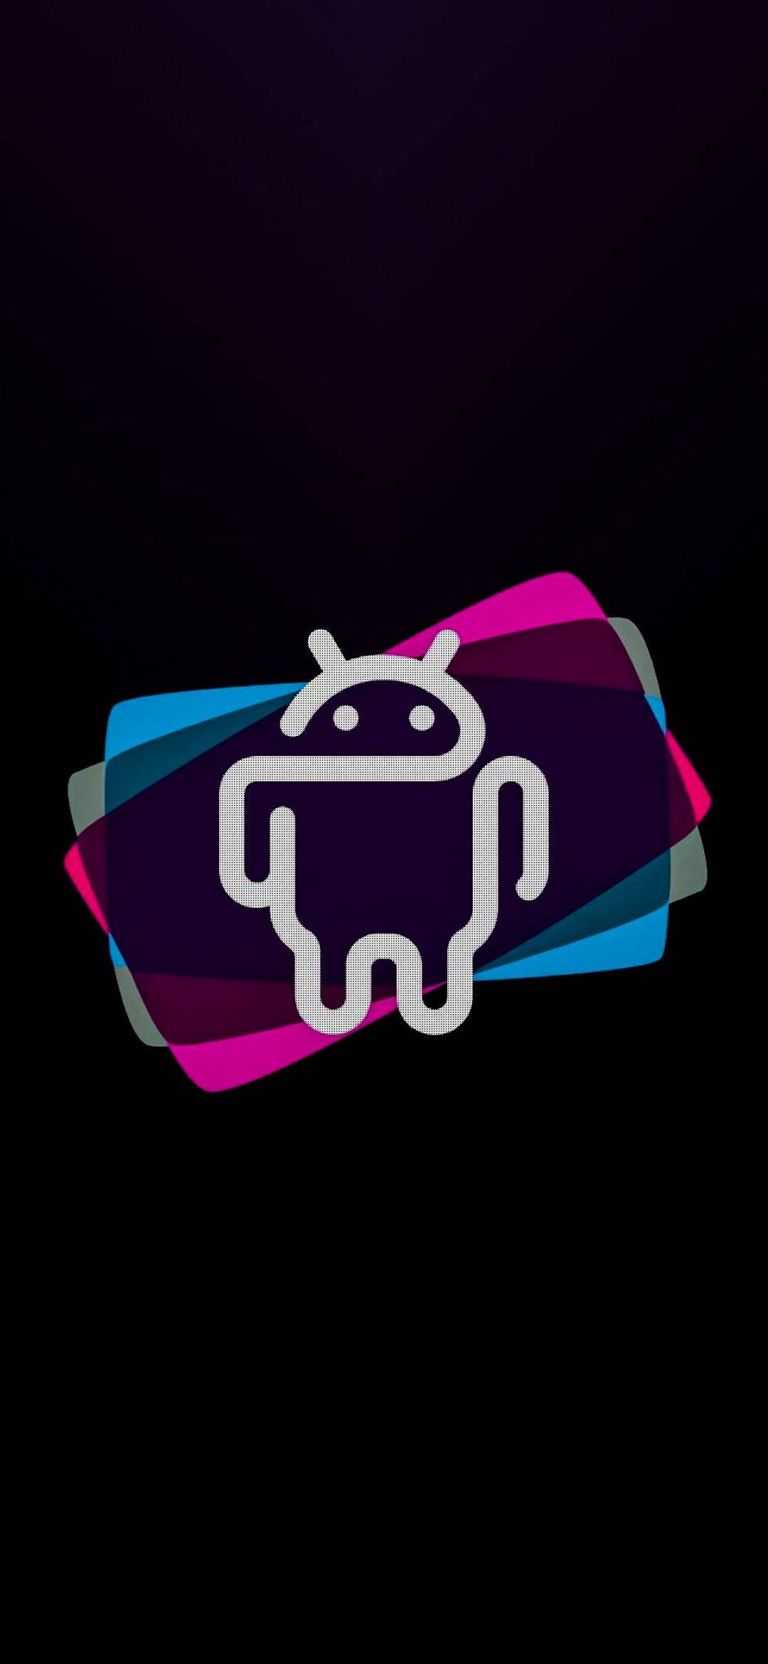 Android Logo AMOLED iPhone Wallpaper 1080×2340